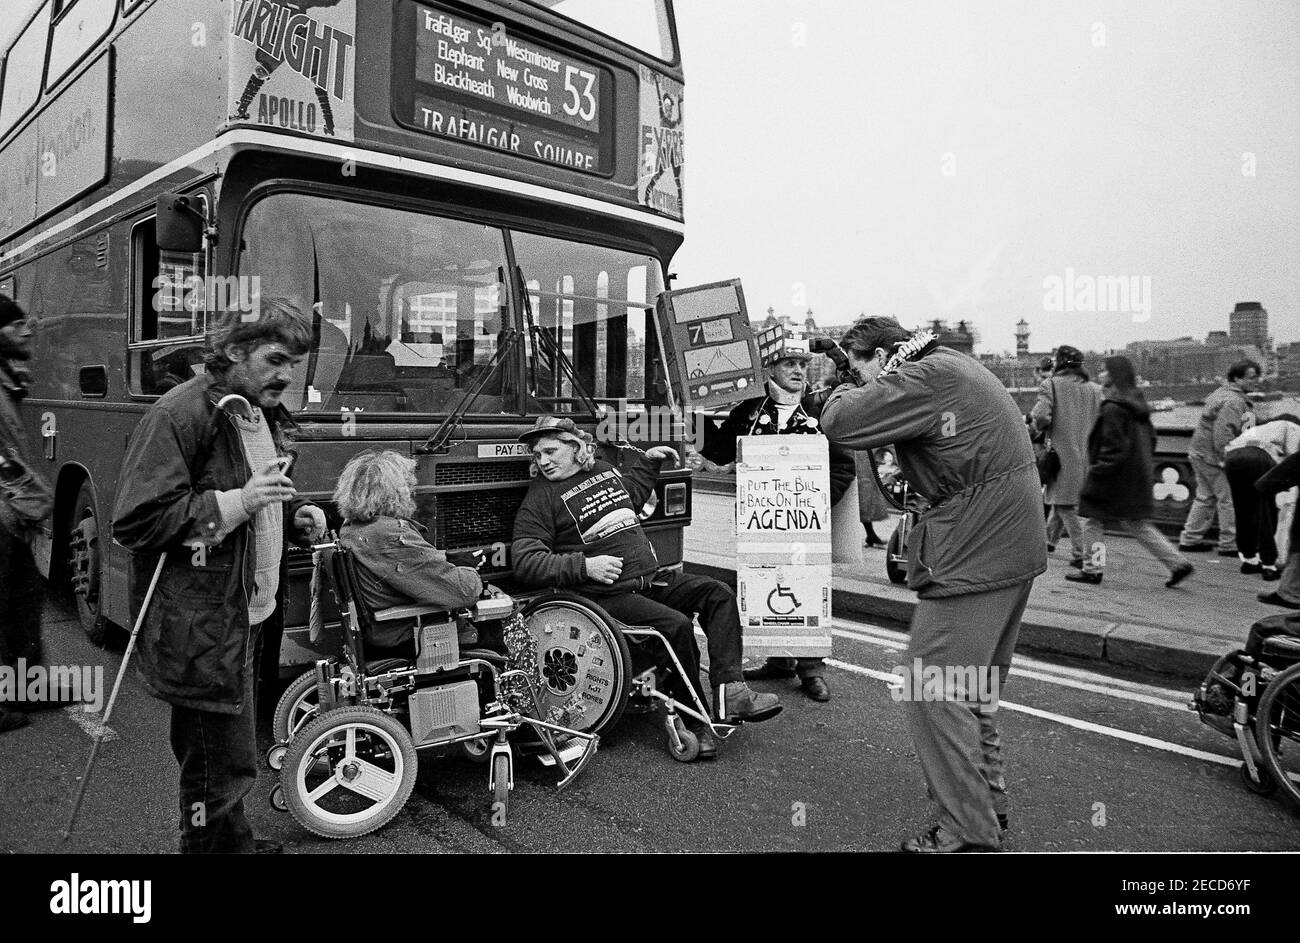 Wheelchair users Barbara Lisicki and Alan Holdsworth from DAN (Disabled Action Network) handcuff themselves to a London bus on Westminster Bridge, London in  February 1995 as part of a series of protests about lack of disabled persons access to public transport, in the lead up to the Disability Discrimination Act being debated in Parliament. Stock Photo